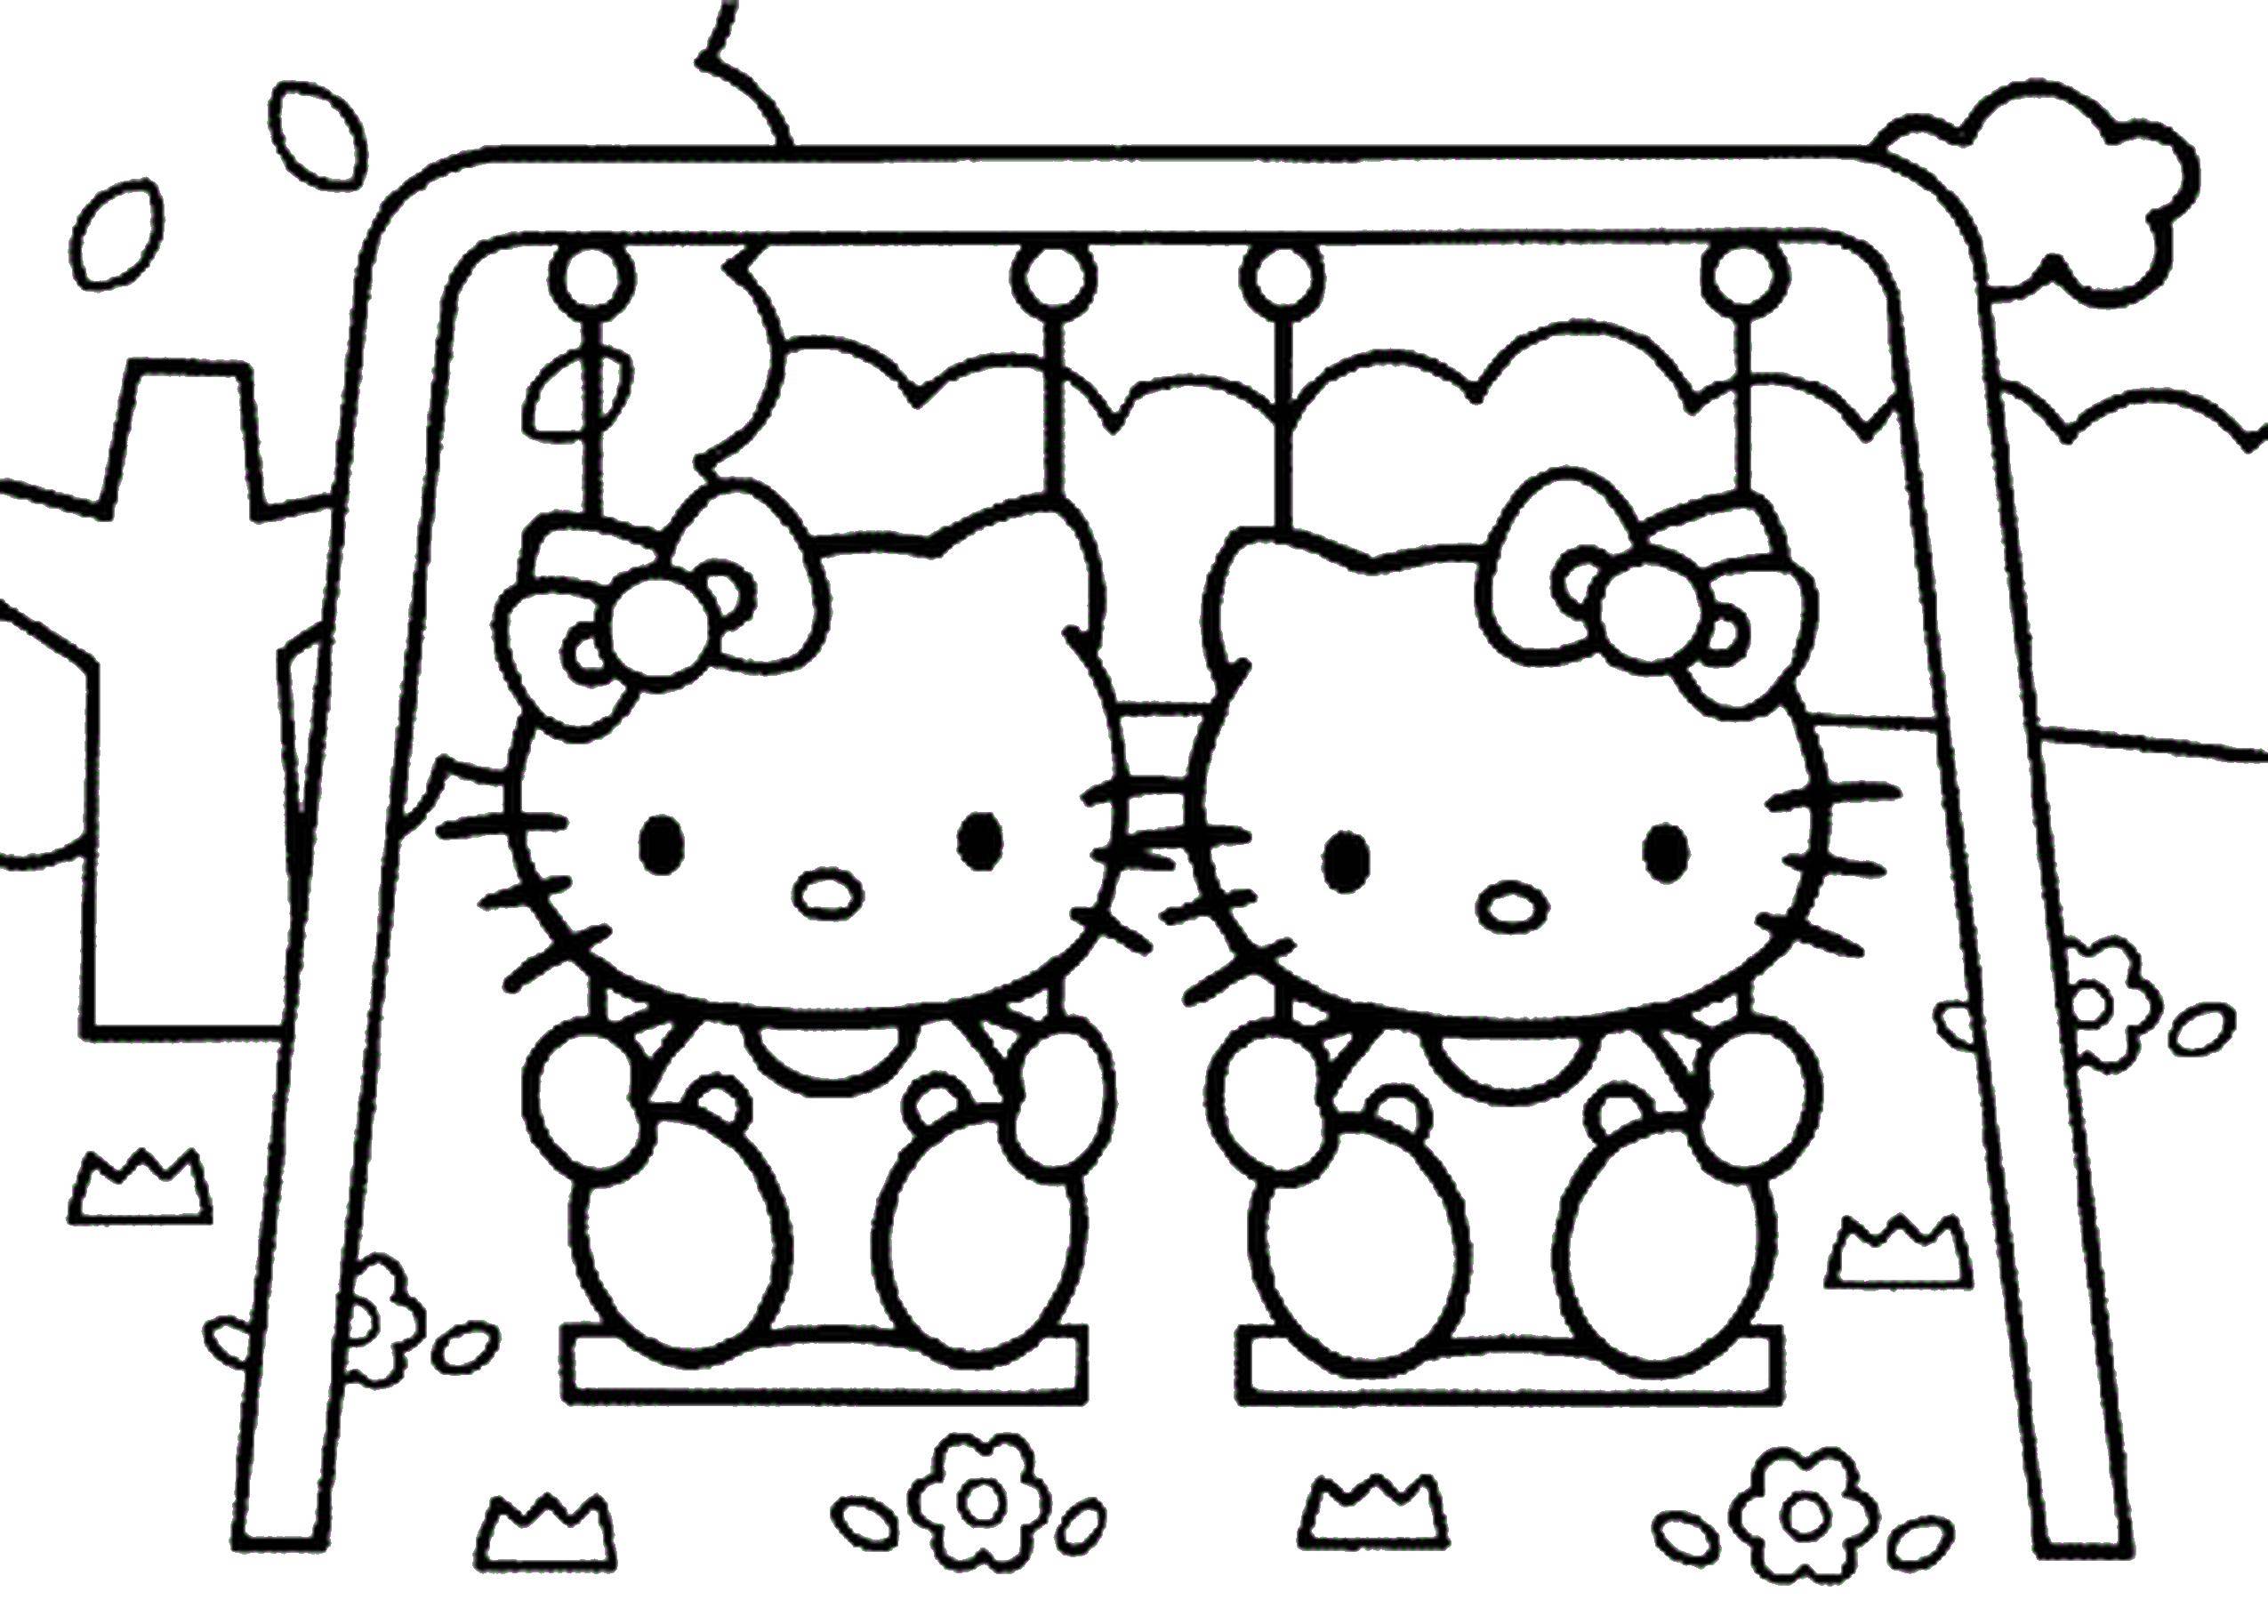 Coloring Hello kitty in your jumperoo. Category Hello Kitty. Tags:  Hello Kitty.